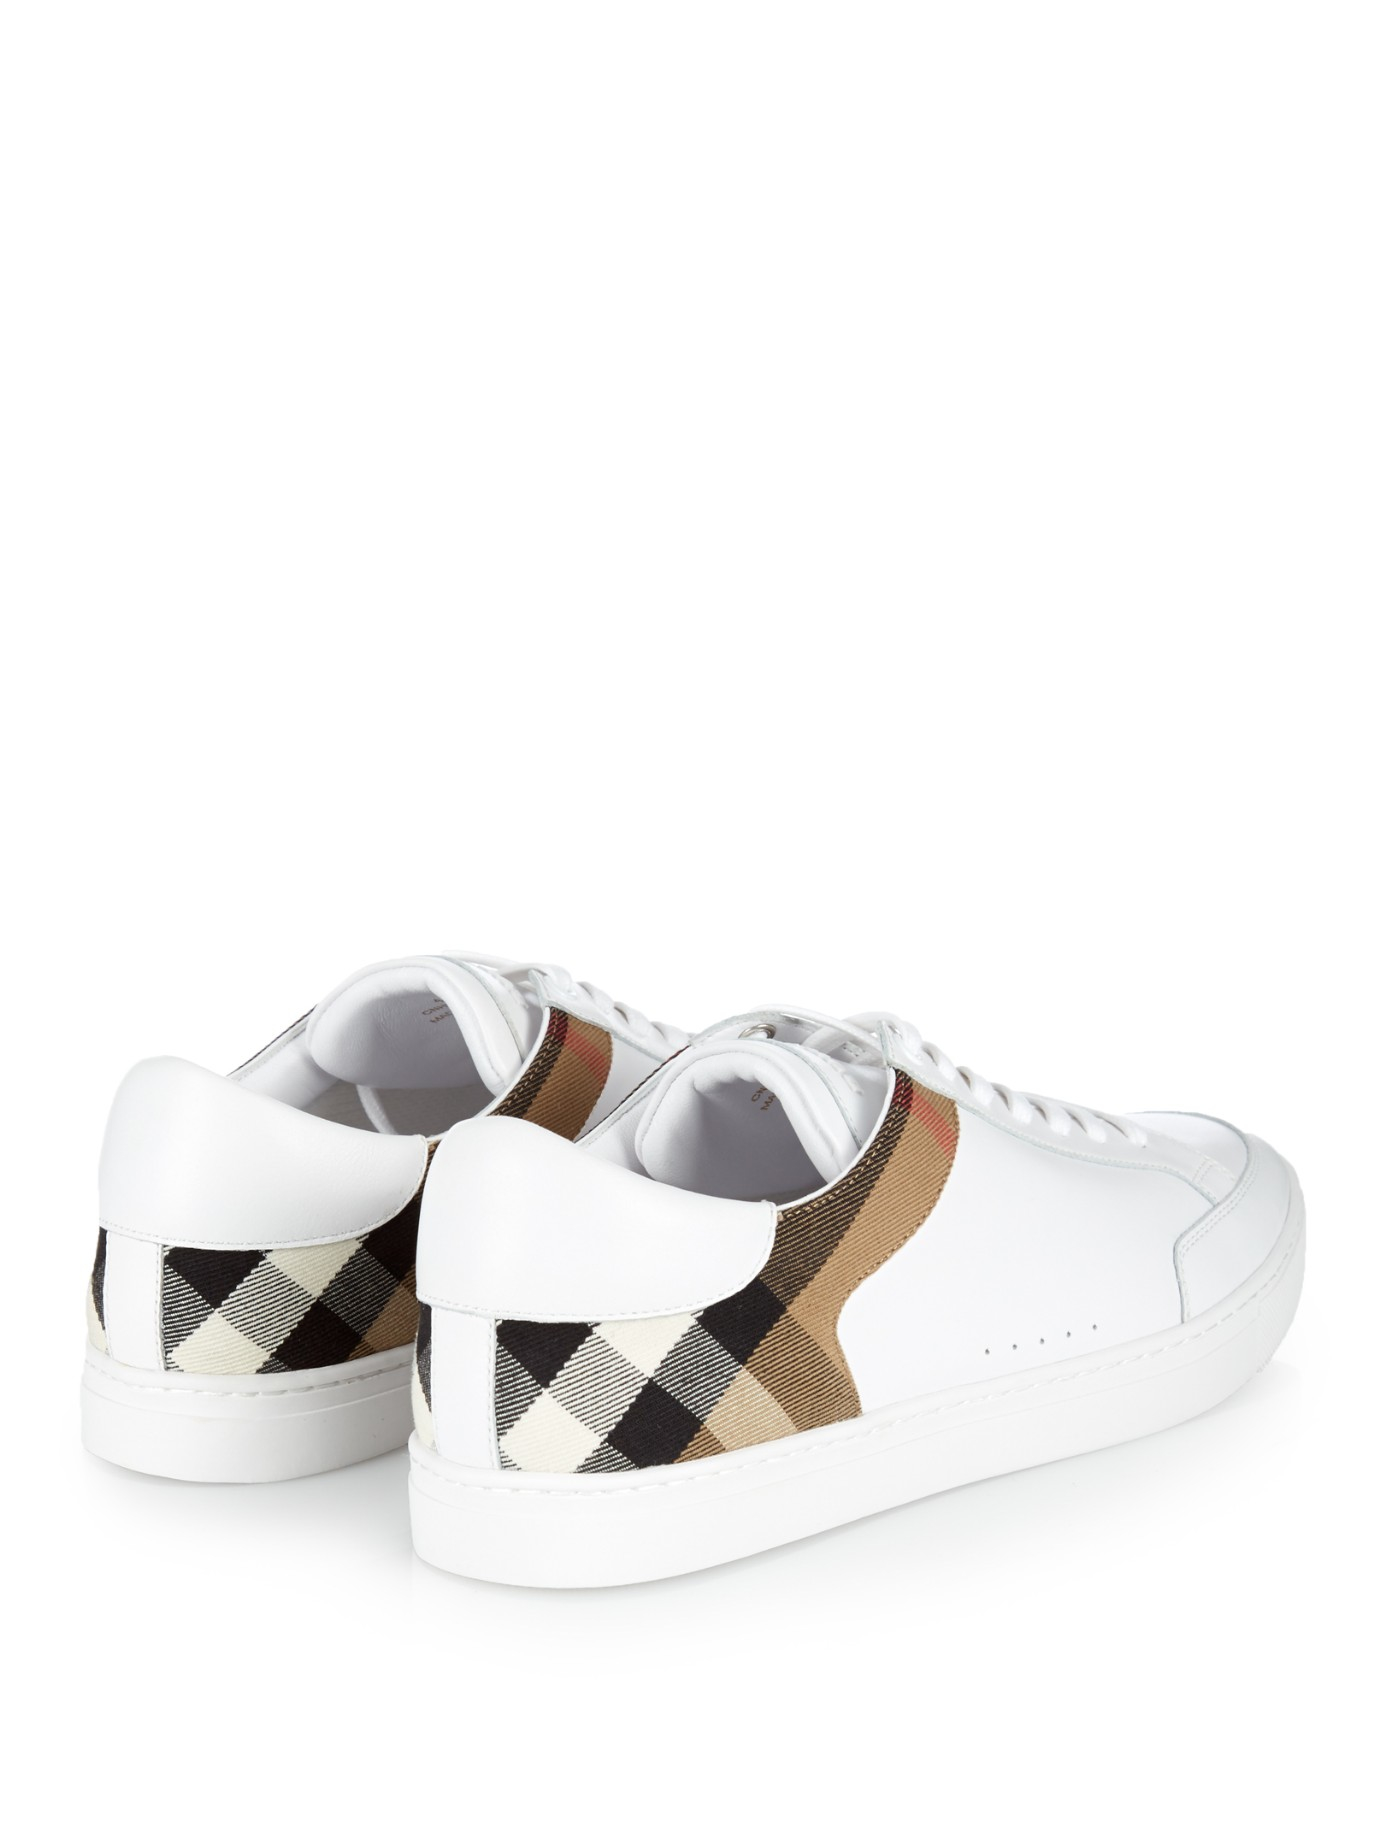 Burberry Leather House-check Low-top Trainers in White for Men - Lyst